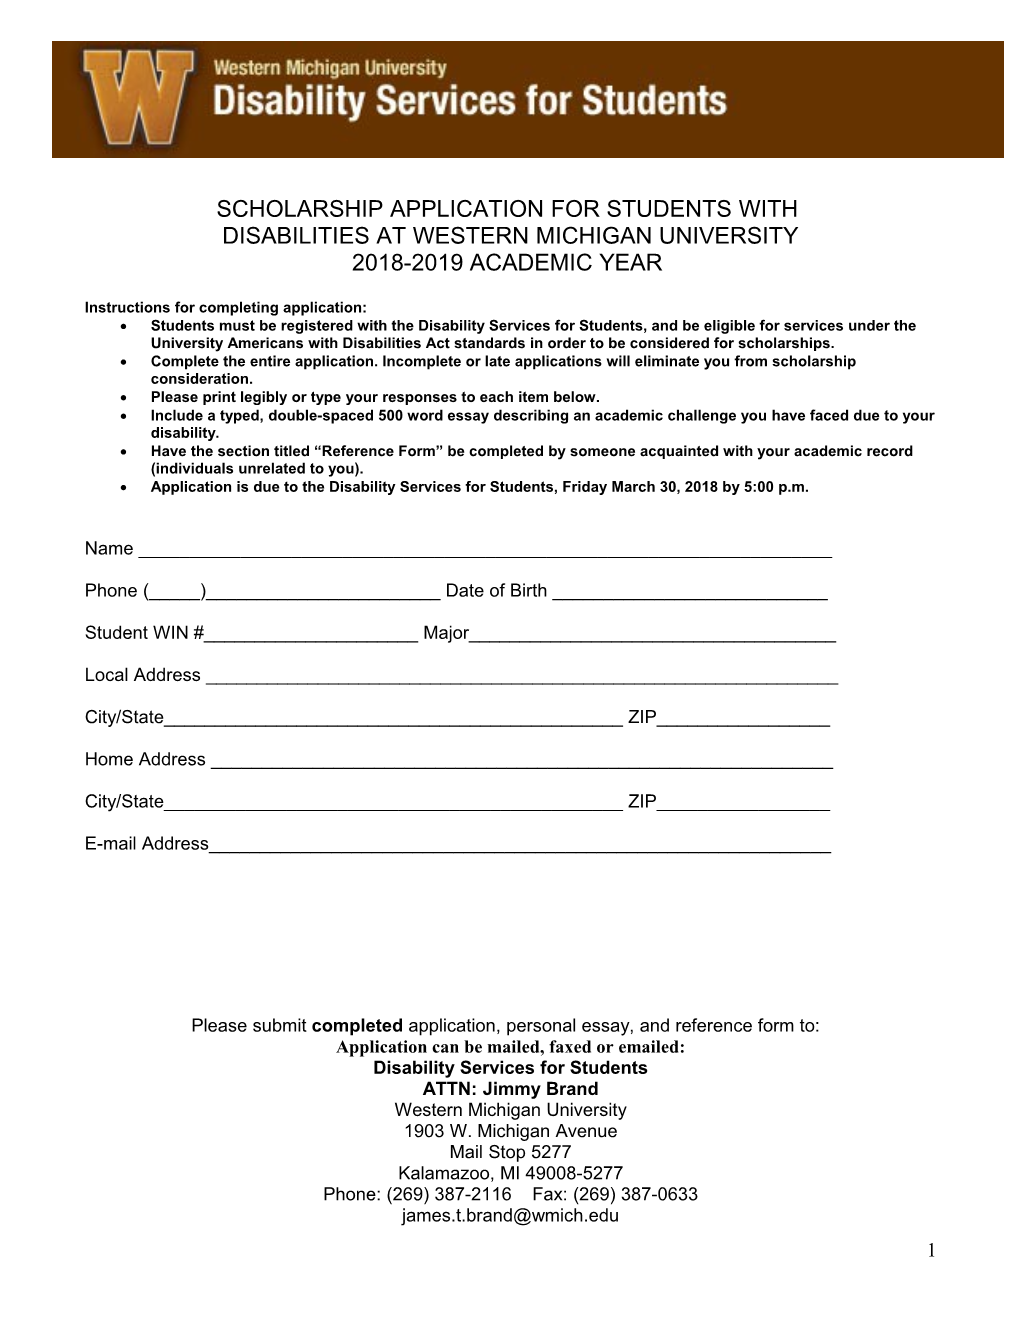 The Ohio Lions Foundation/Helen Keller Scholarship Application for Students with Visual